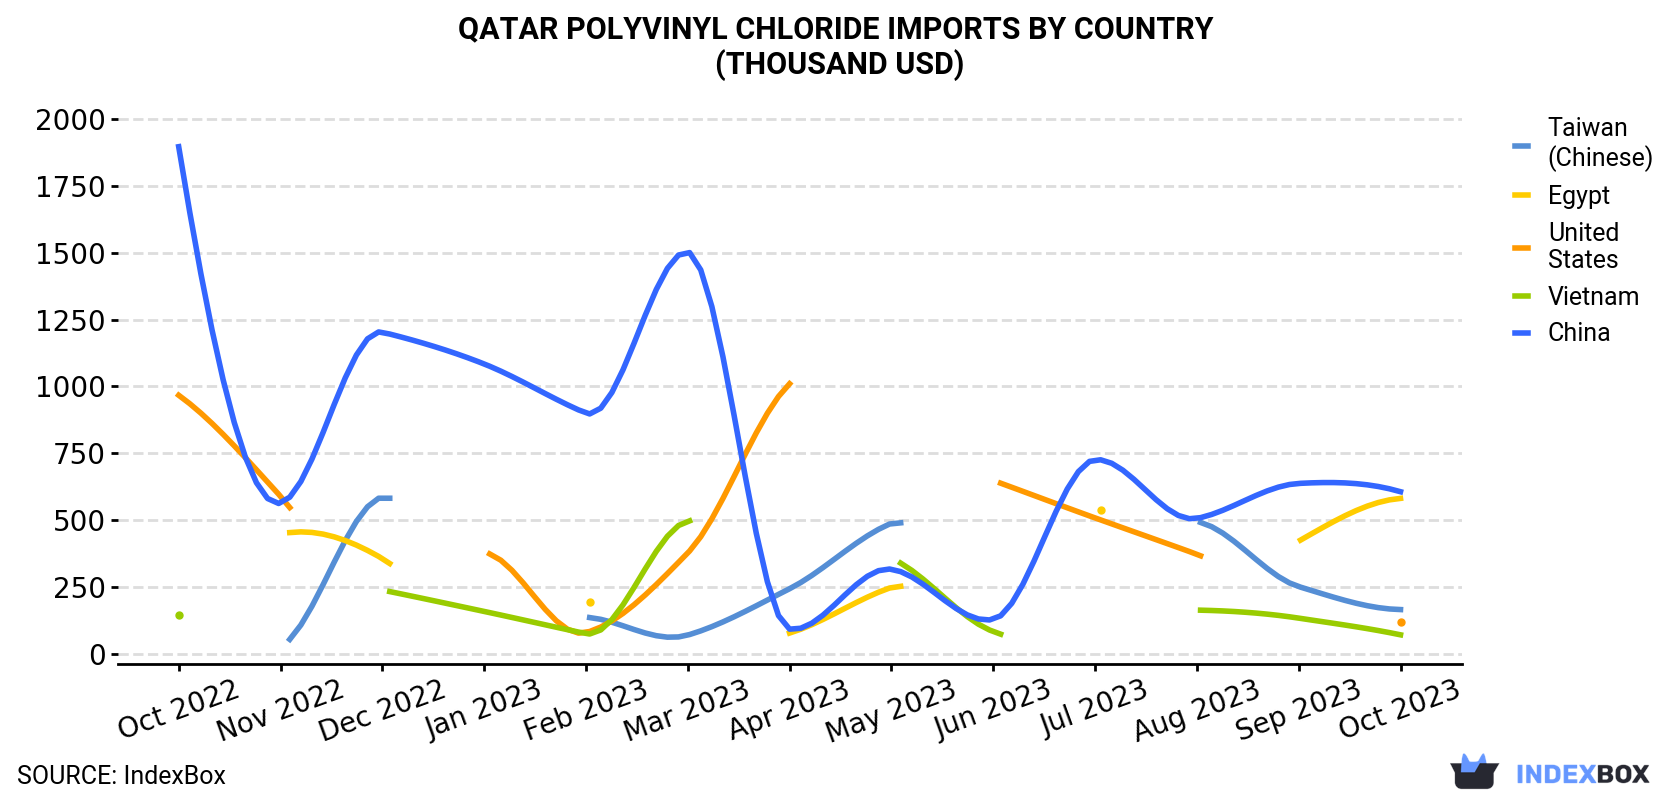 Qatar Polyvinyl Chloride Imports By Country (Thousand USD)